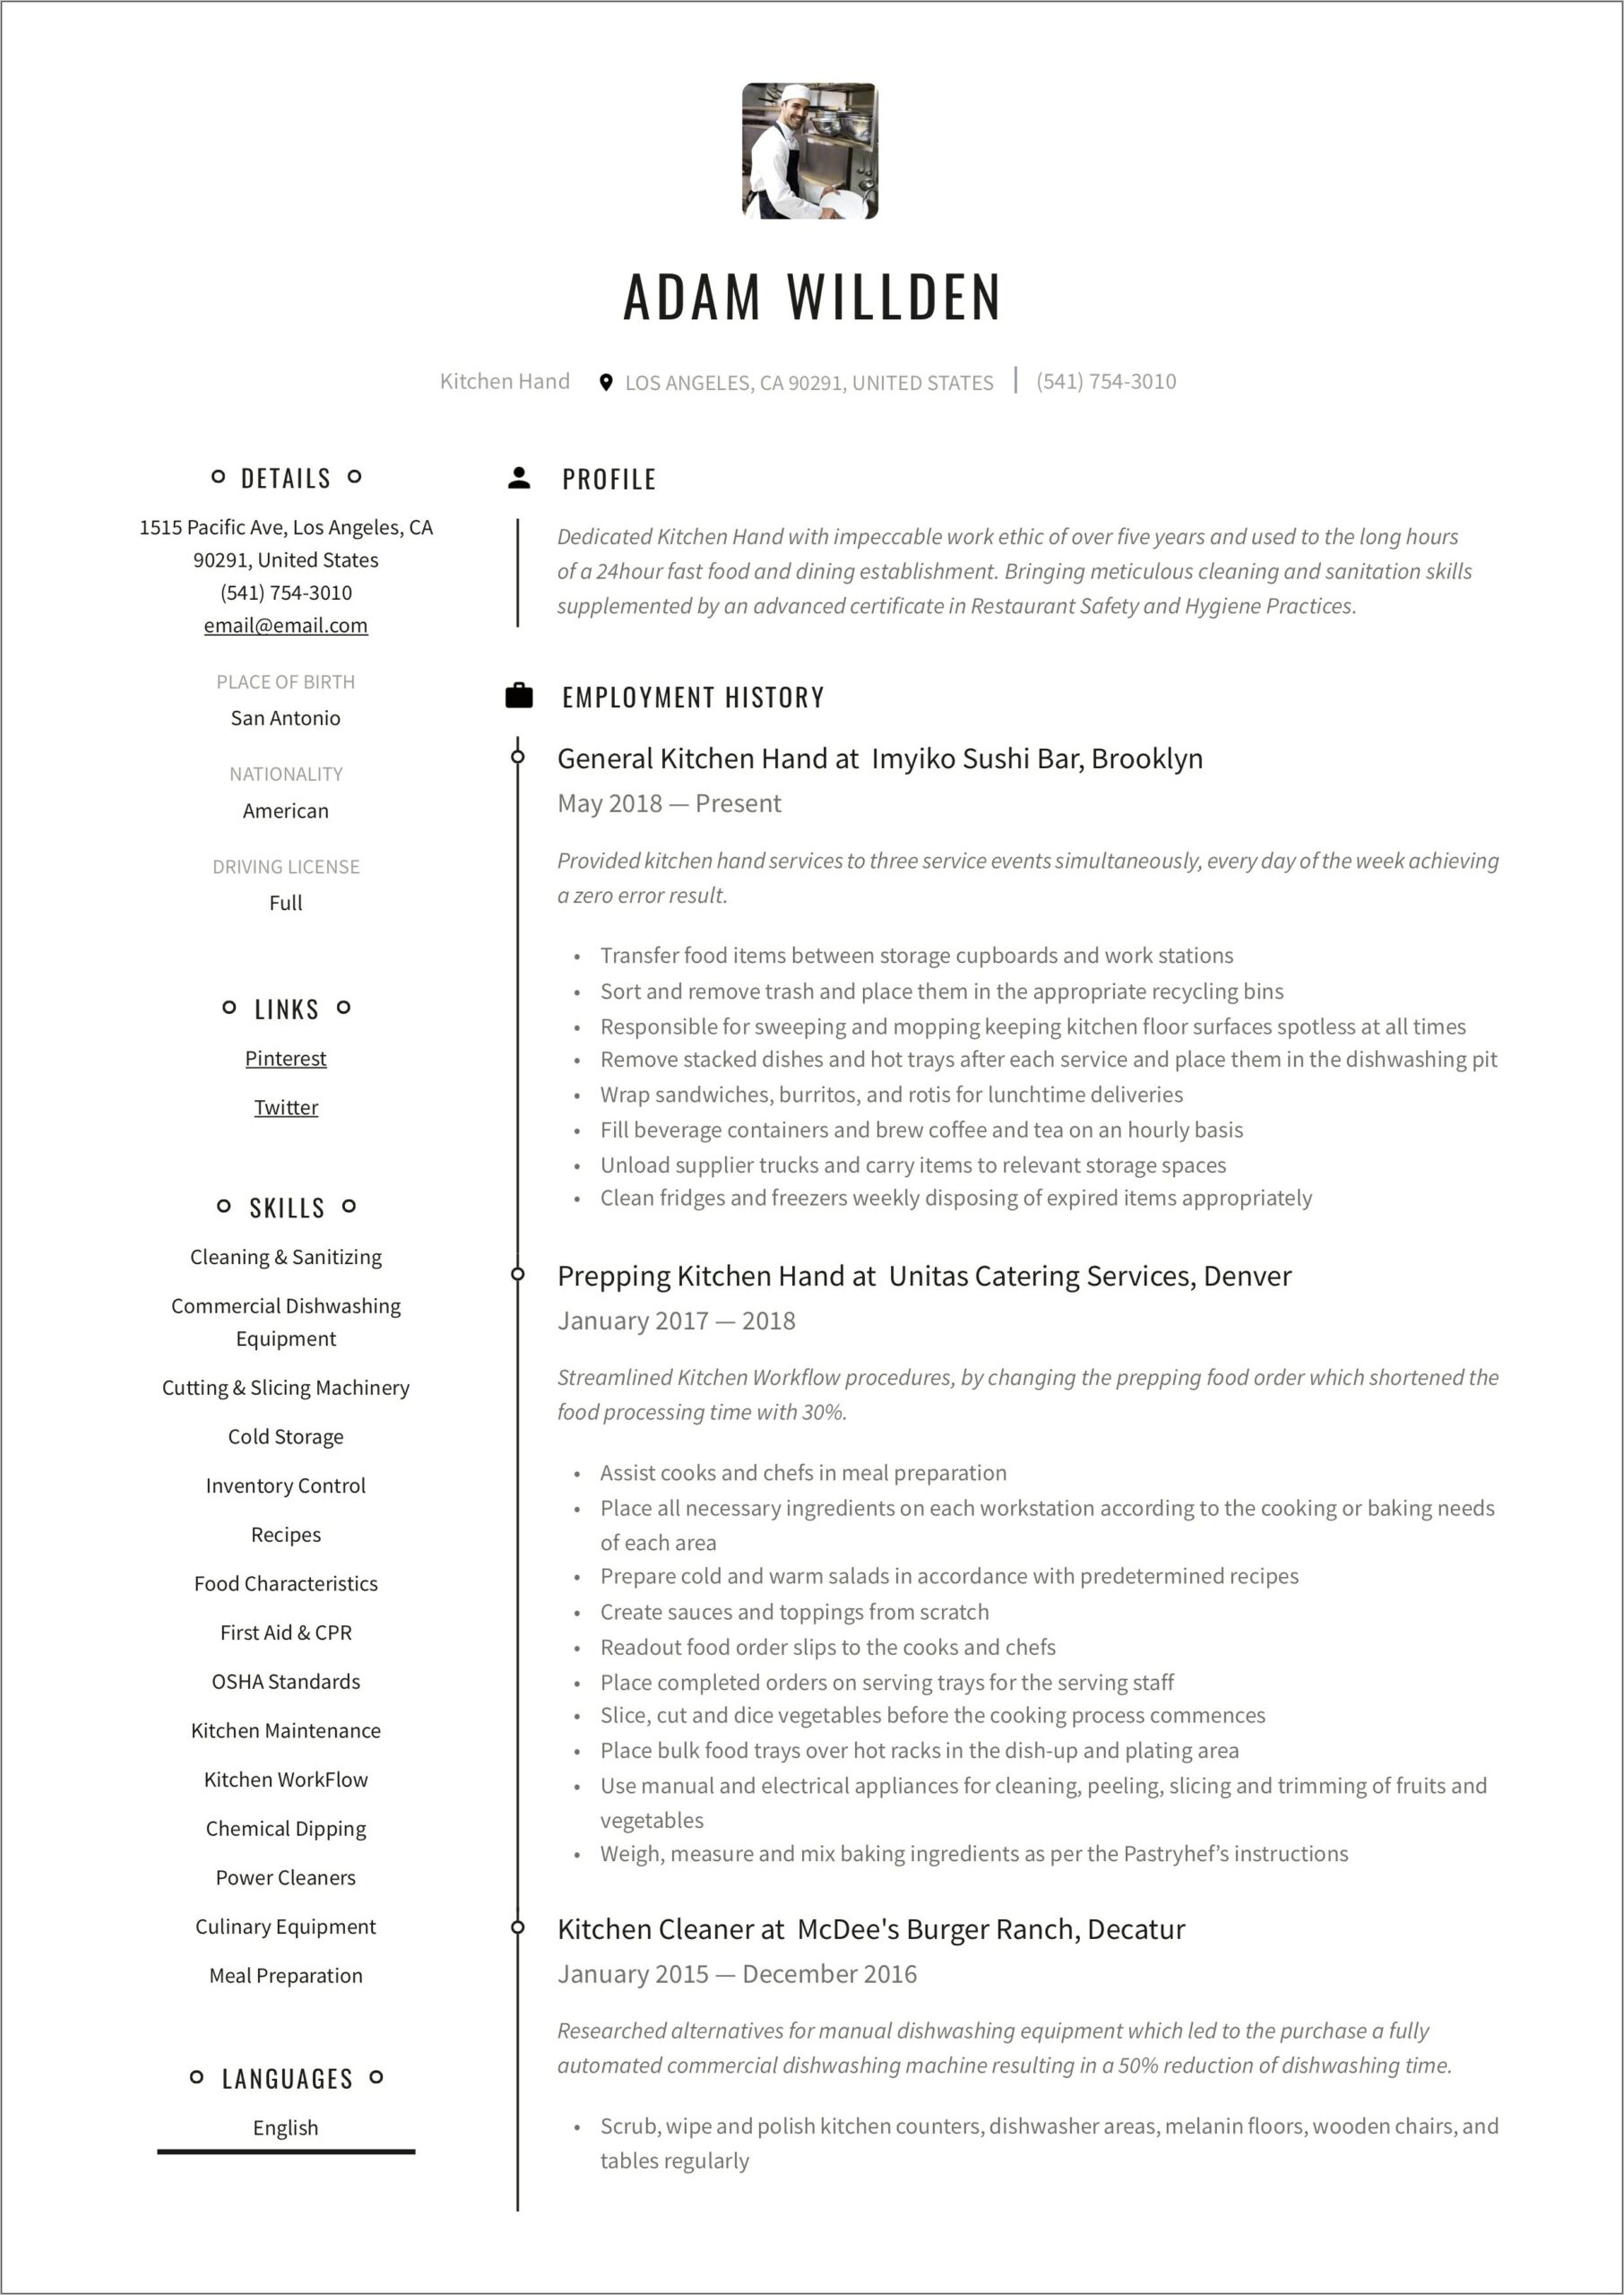 Moving And Storage Resume Sample